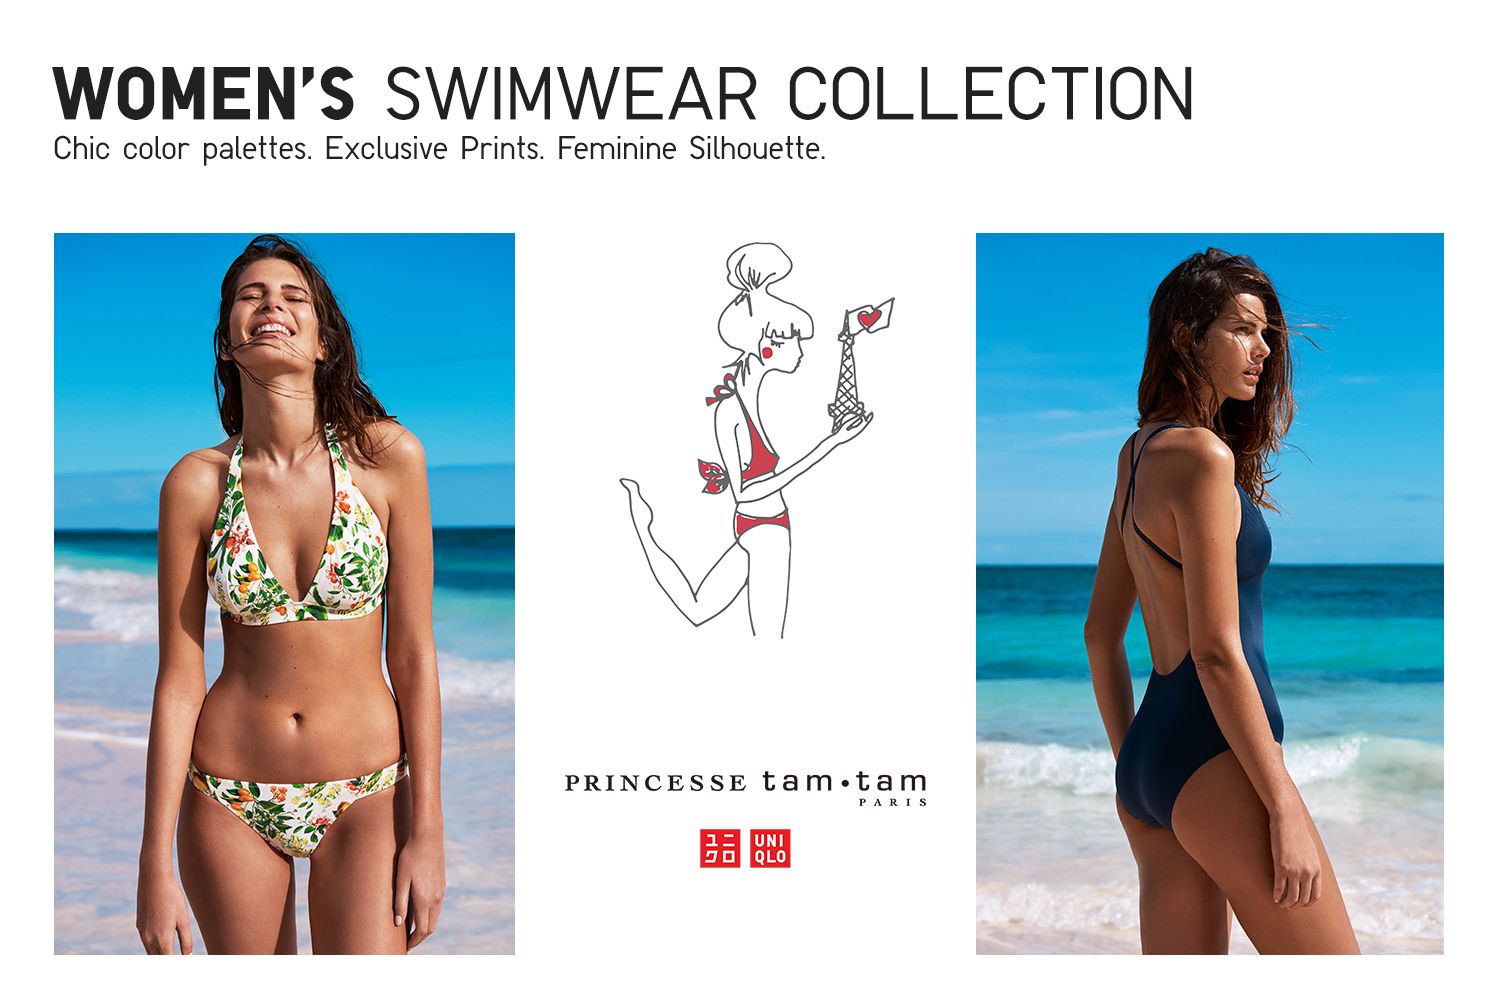 UNIQLO Philippines on X: Face the summer heat in total style. Experience  timeless and modern pieces with our Uniqlo x Princesse tam.tam swimwear  collection featuring impeccable cuts, chic color palettes, and exclusive